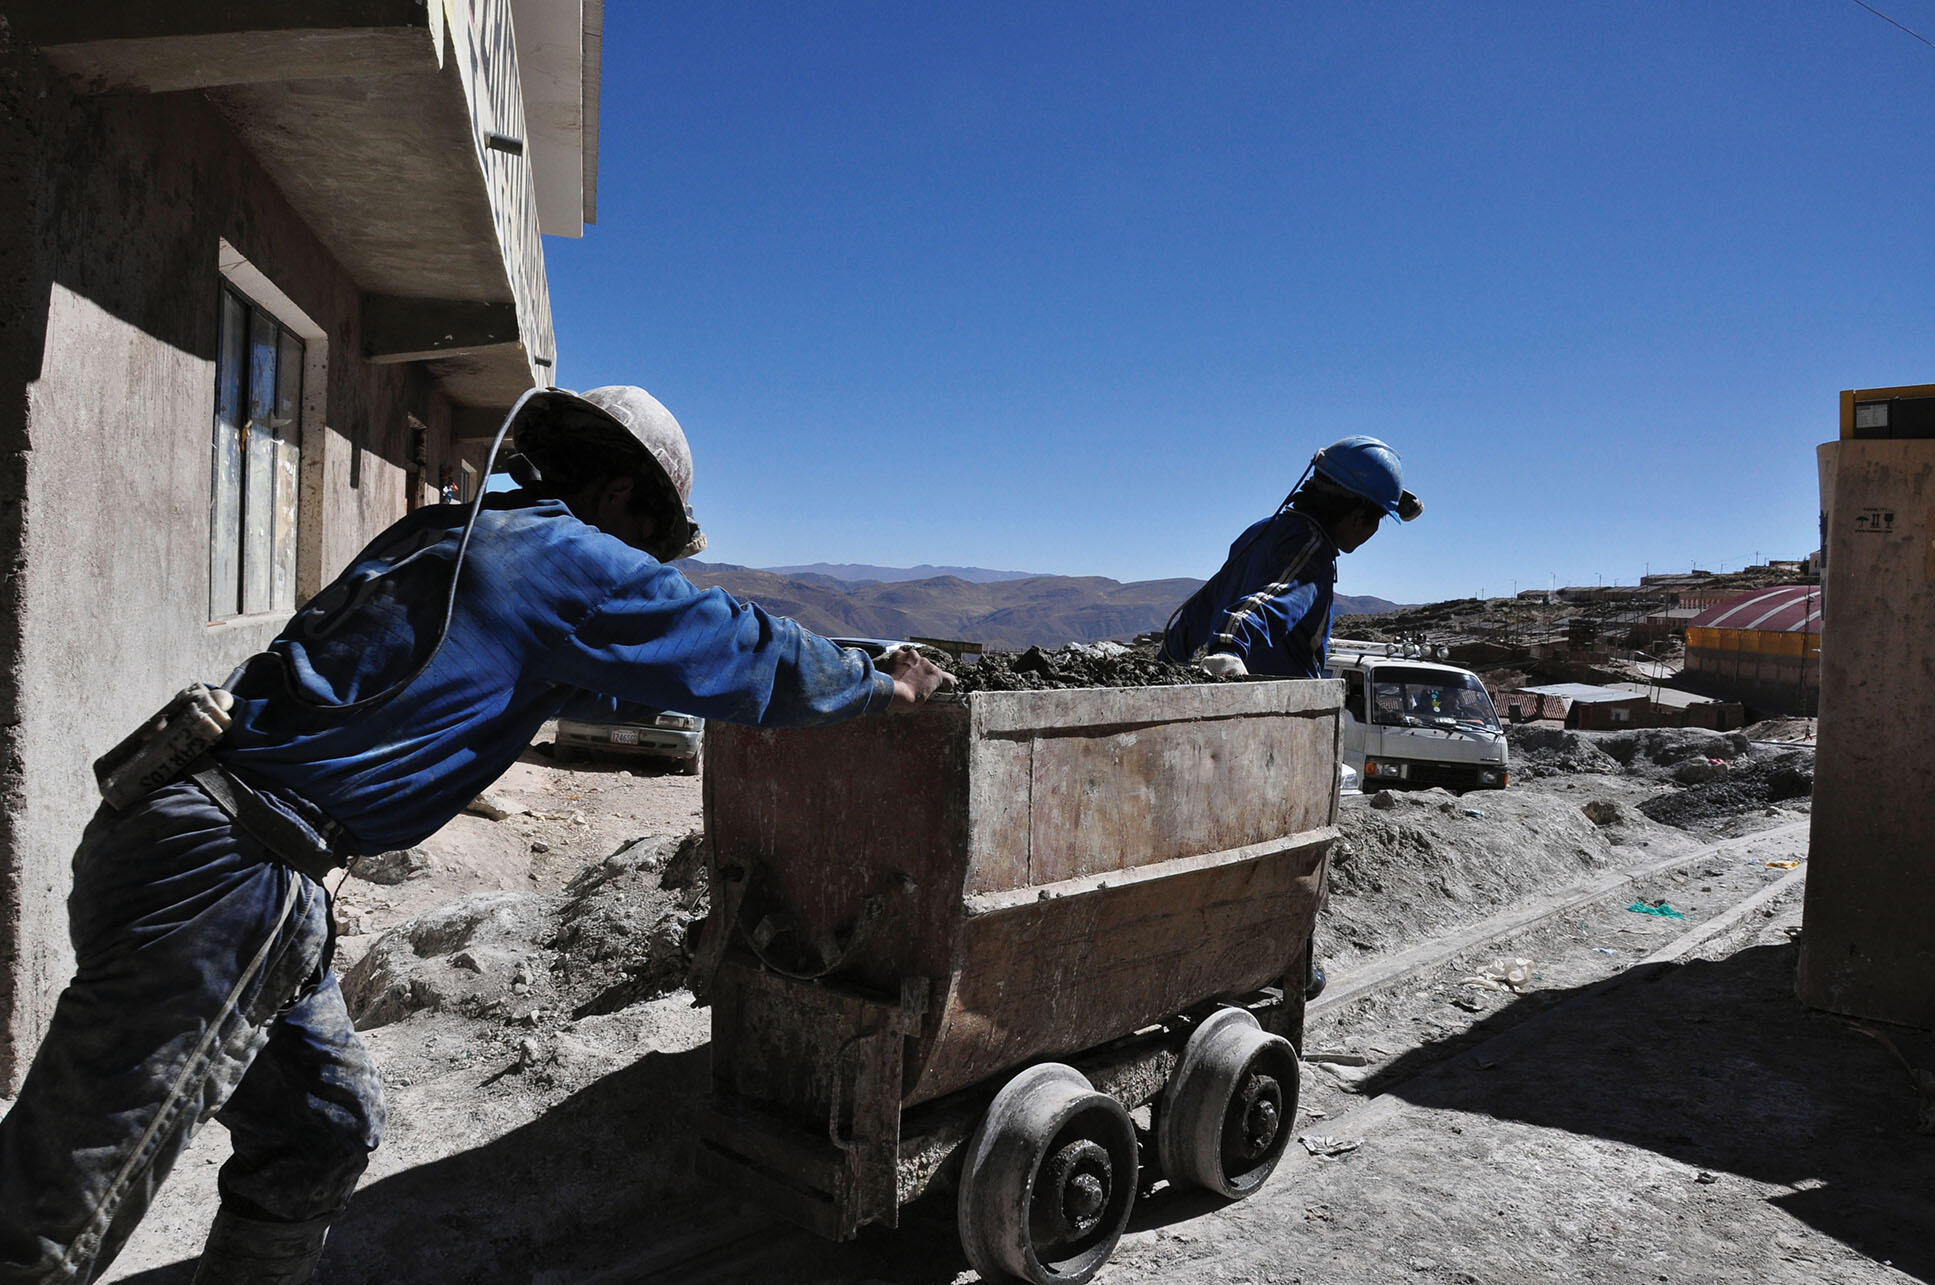 With an economy heavily based on extraction, Bolivian miners pushing carts out of the mines in Potosí, Bolivia. (Photo by Nyall & Maryanne.)